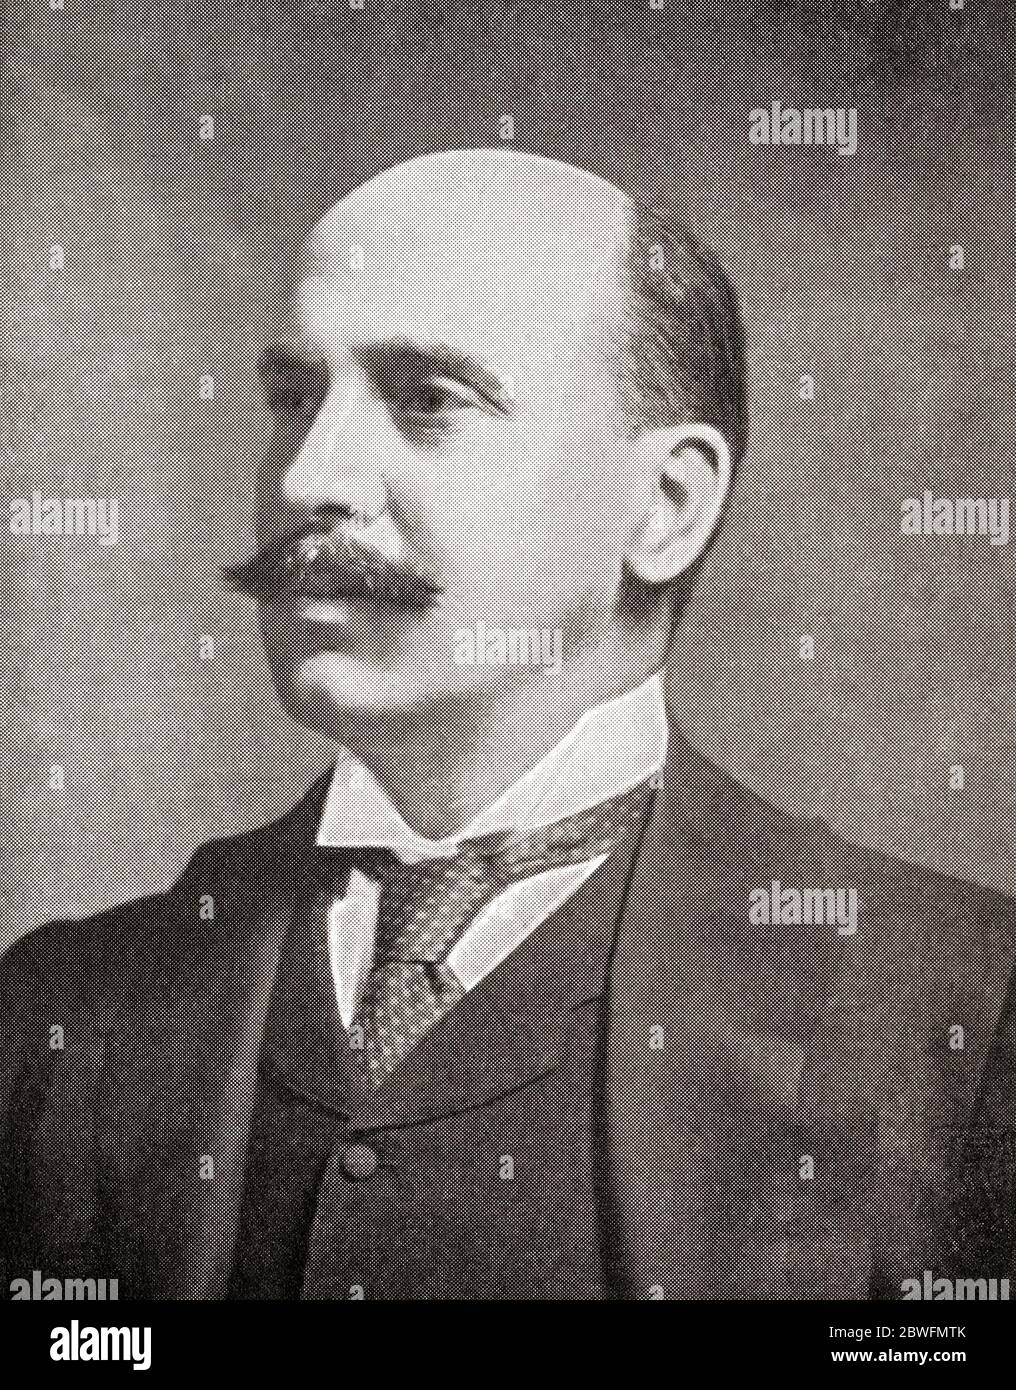 Weetman Dickinson Pearson, 1st Viscount Cowdray, 1856 1927, aka Sir Weetman Pearson, and Lord Cowdray. British engineer, oil industrialist, benefactor and Liberal politician.  From The Business Encyclopaedia and Legal Adviser, published 1907. Stock Photo